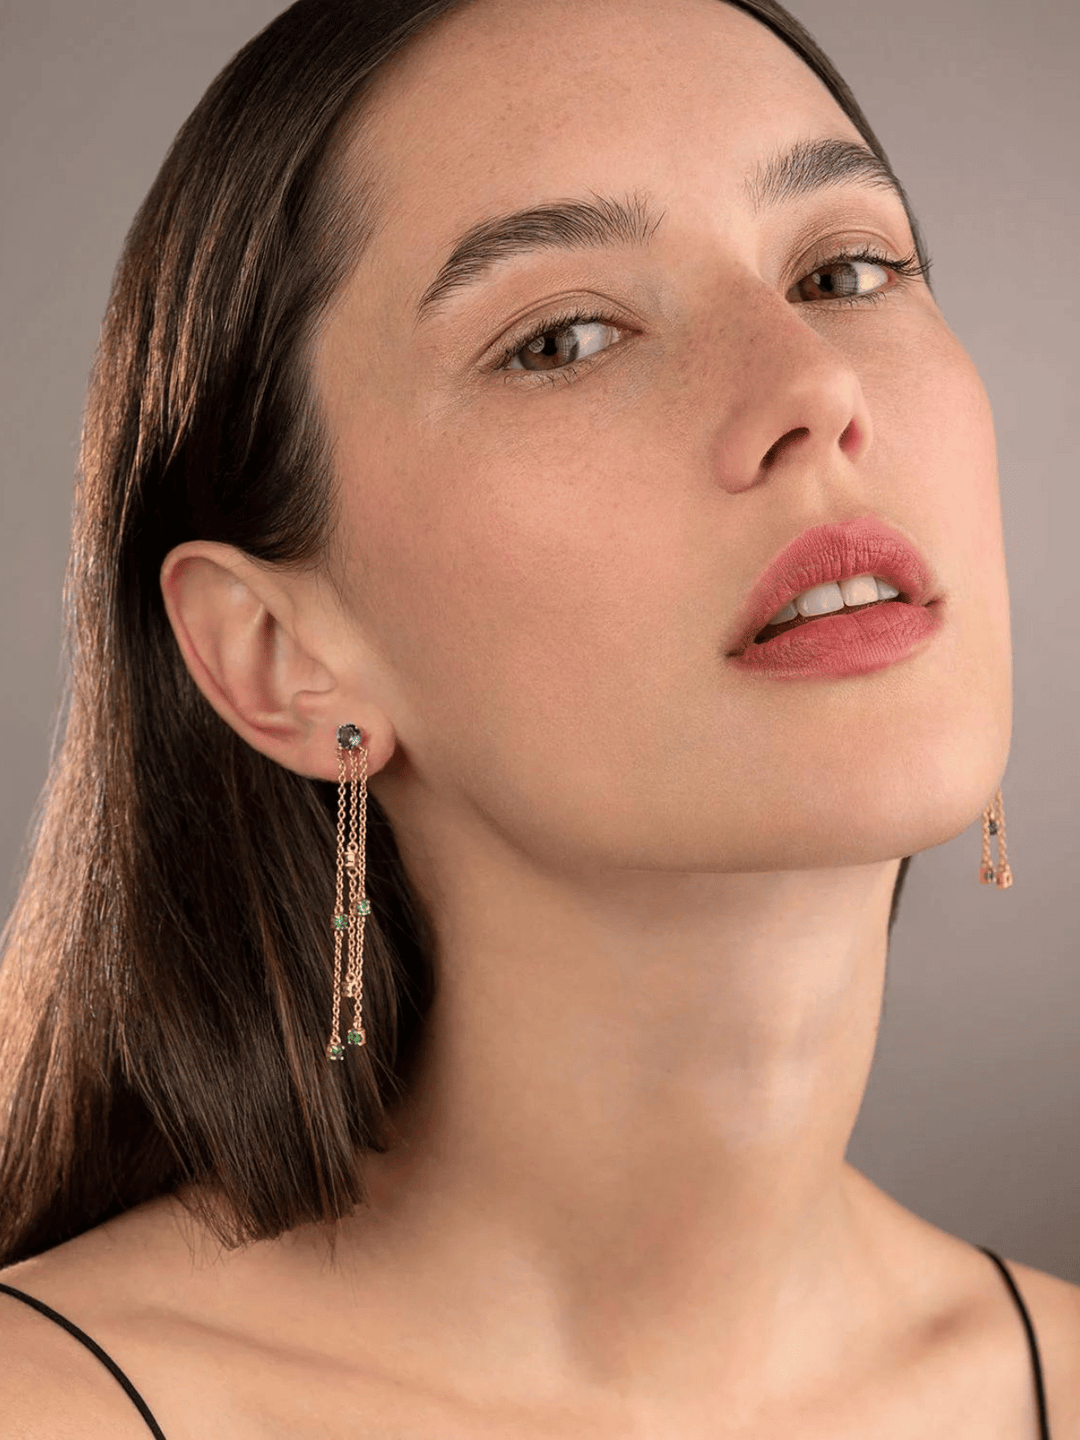 Clapping out loud earrings